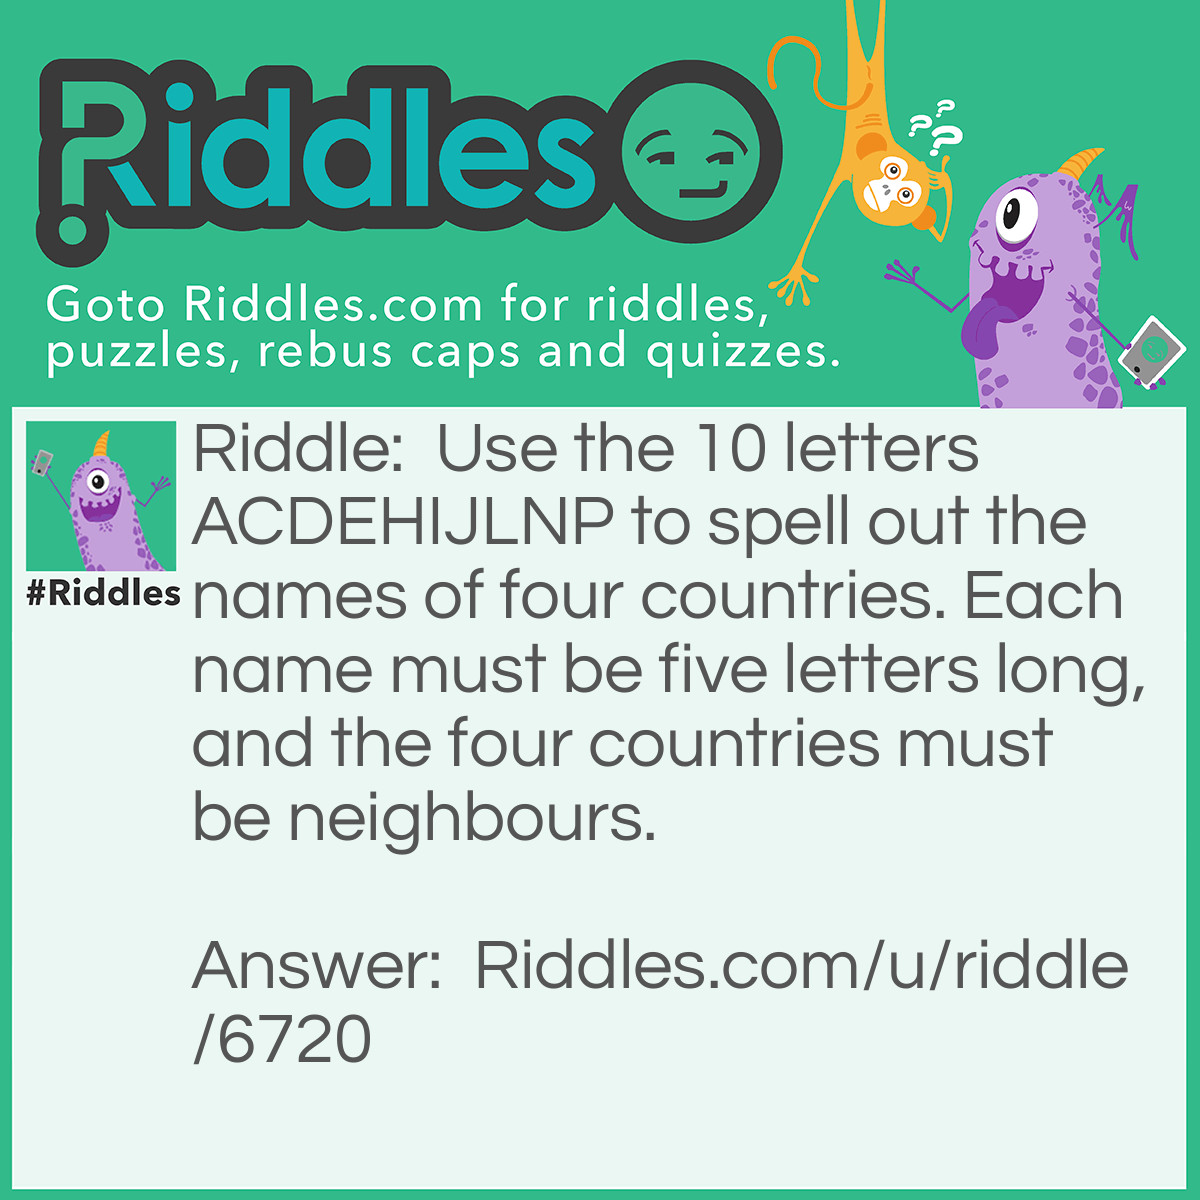 Riddle: Use the 10 letters ACDEHIJLNP to spell out the names of four countries. Each name must be five letters long, and the four countries must be neighbours. Answer: Japan, China, Nepal, India